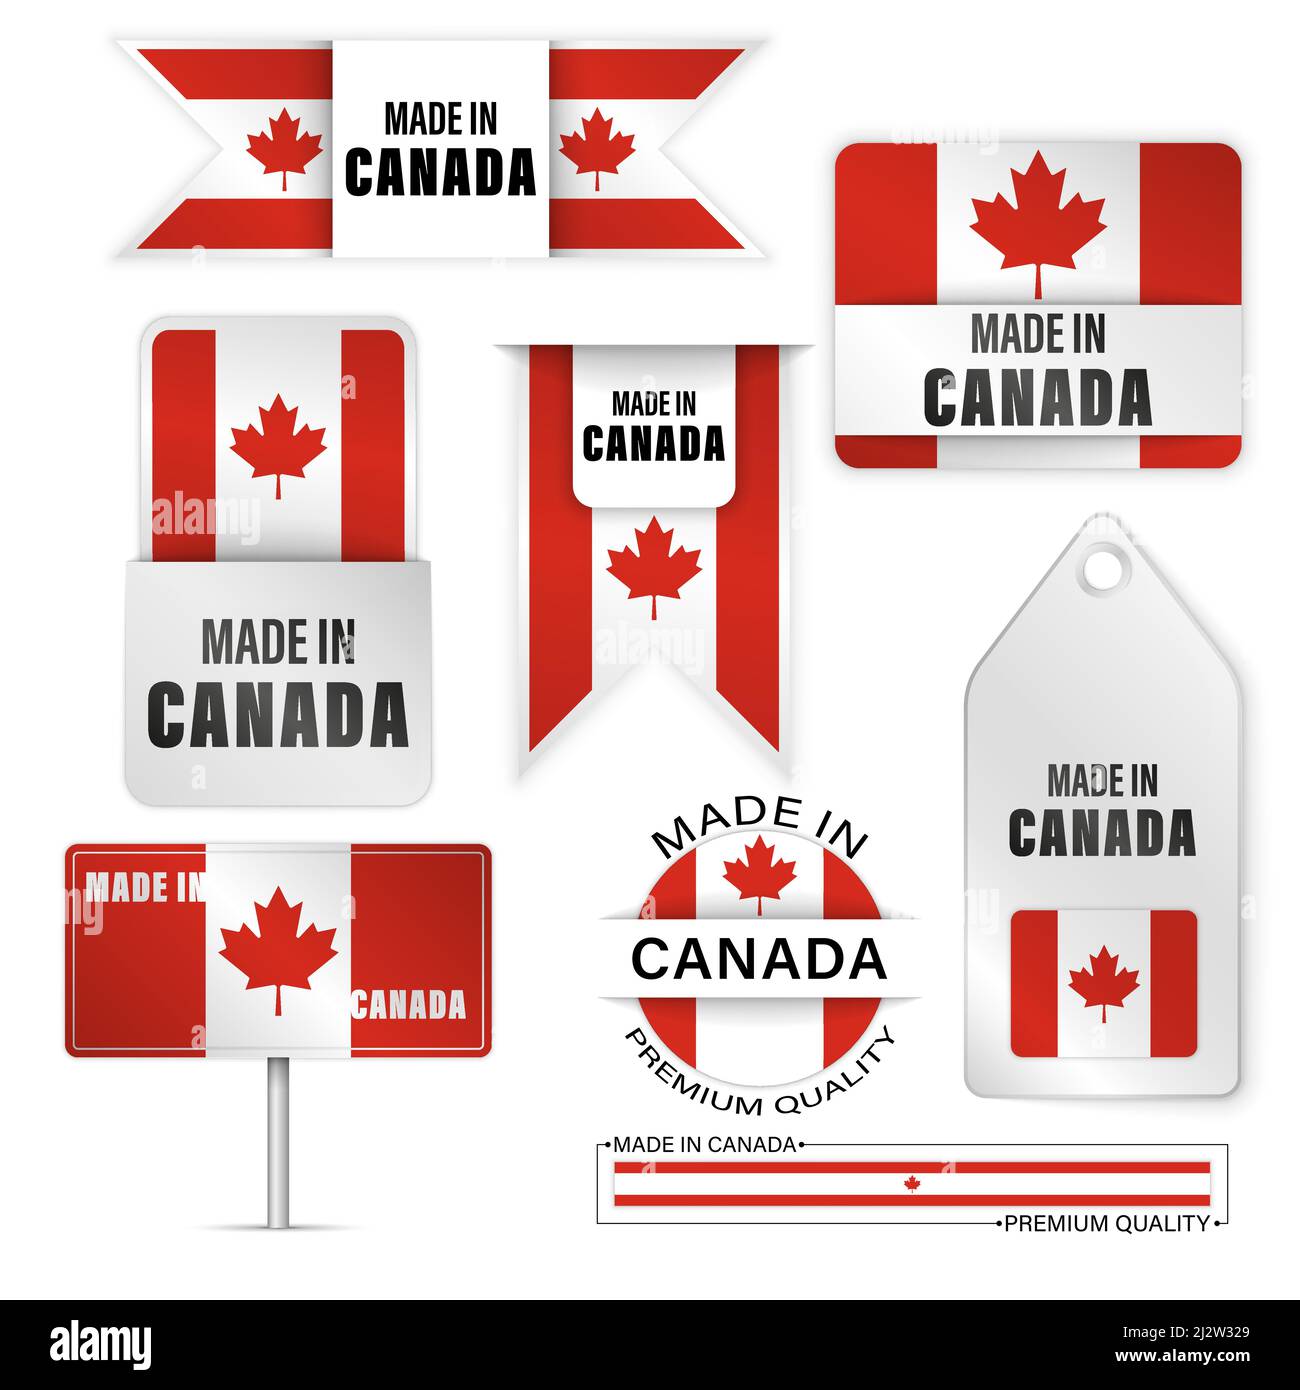 Made in Canada graphics and labels set. Some elements of impact for the use you want to make of it. Stock Vector